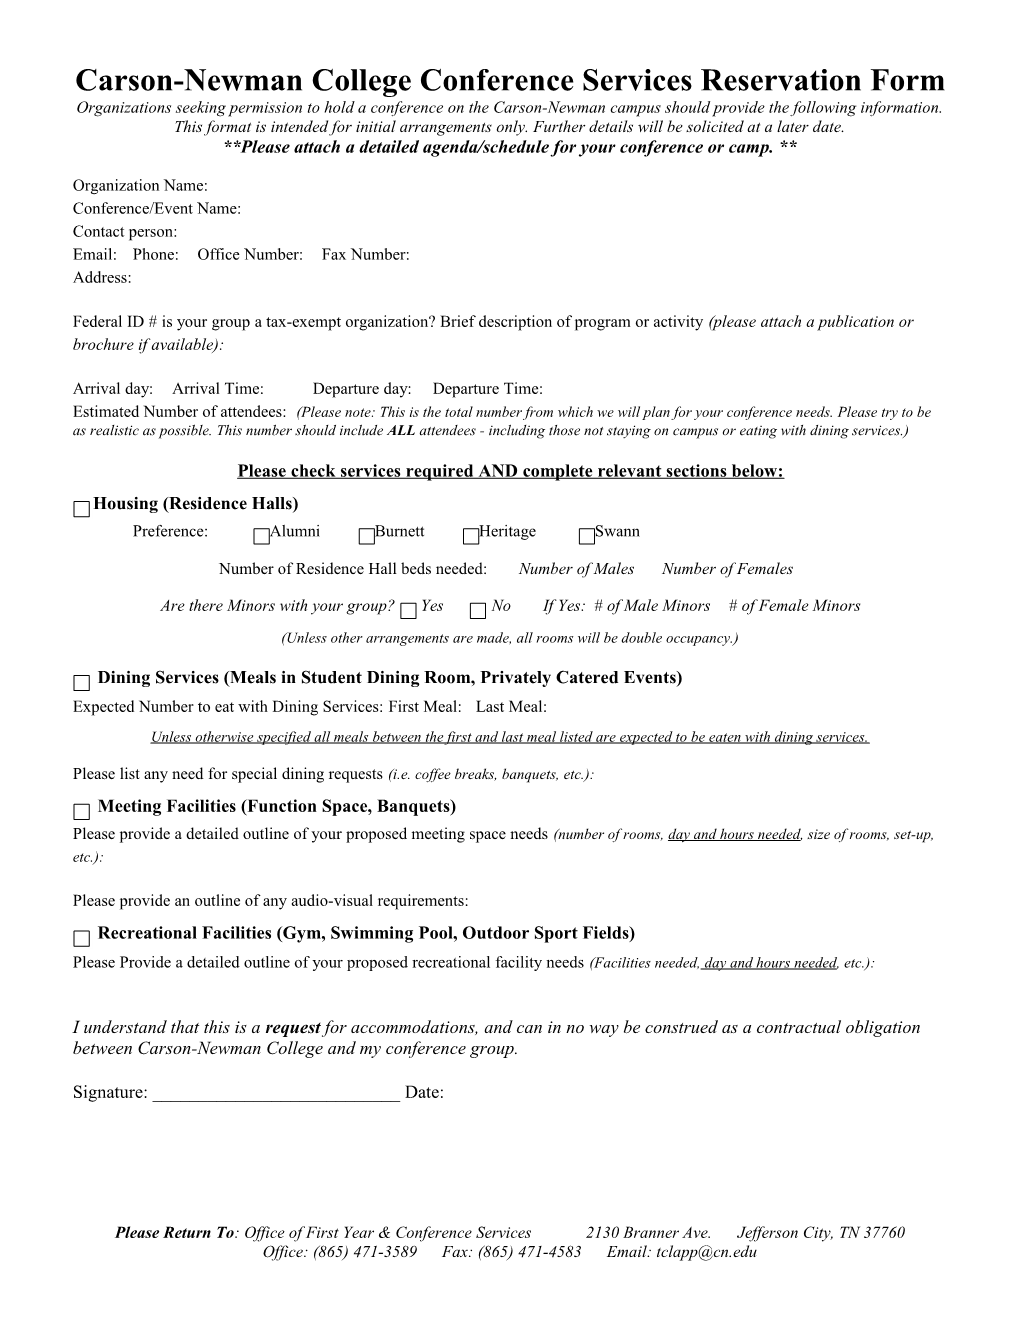 Carson-Newman College Conference Services Reservation Form